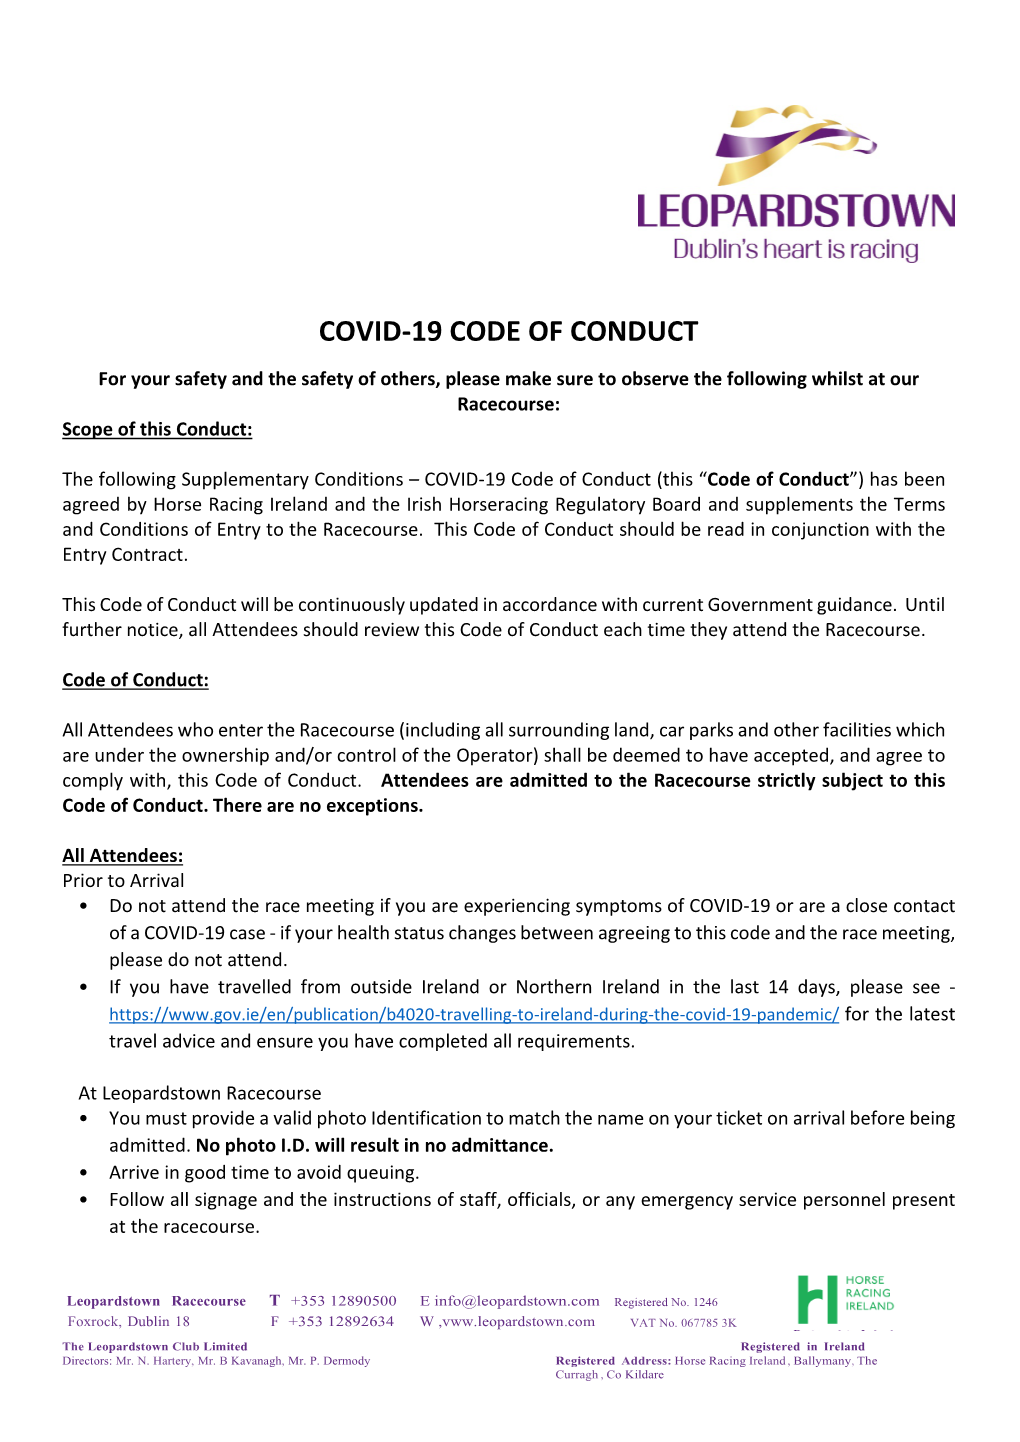 COVID-19 CODE of CONDUCT for Your Safety and the Safety of Others, Please Make Sure to Observe the Following Whilst at Our Racecourse: Scope of This Conduct